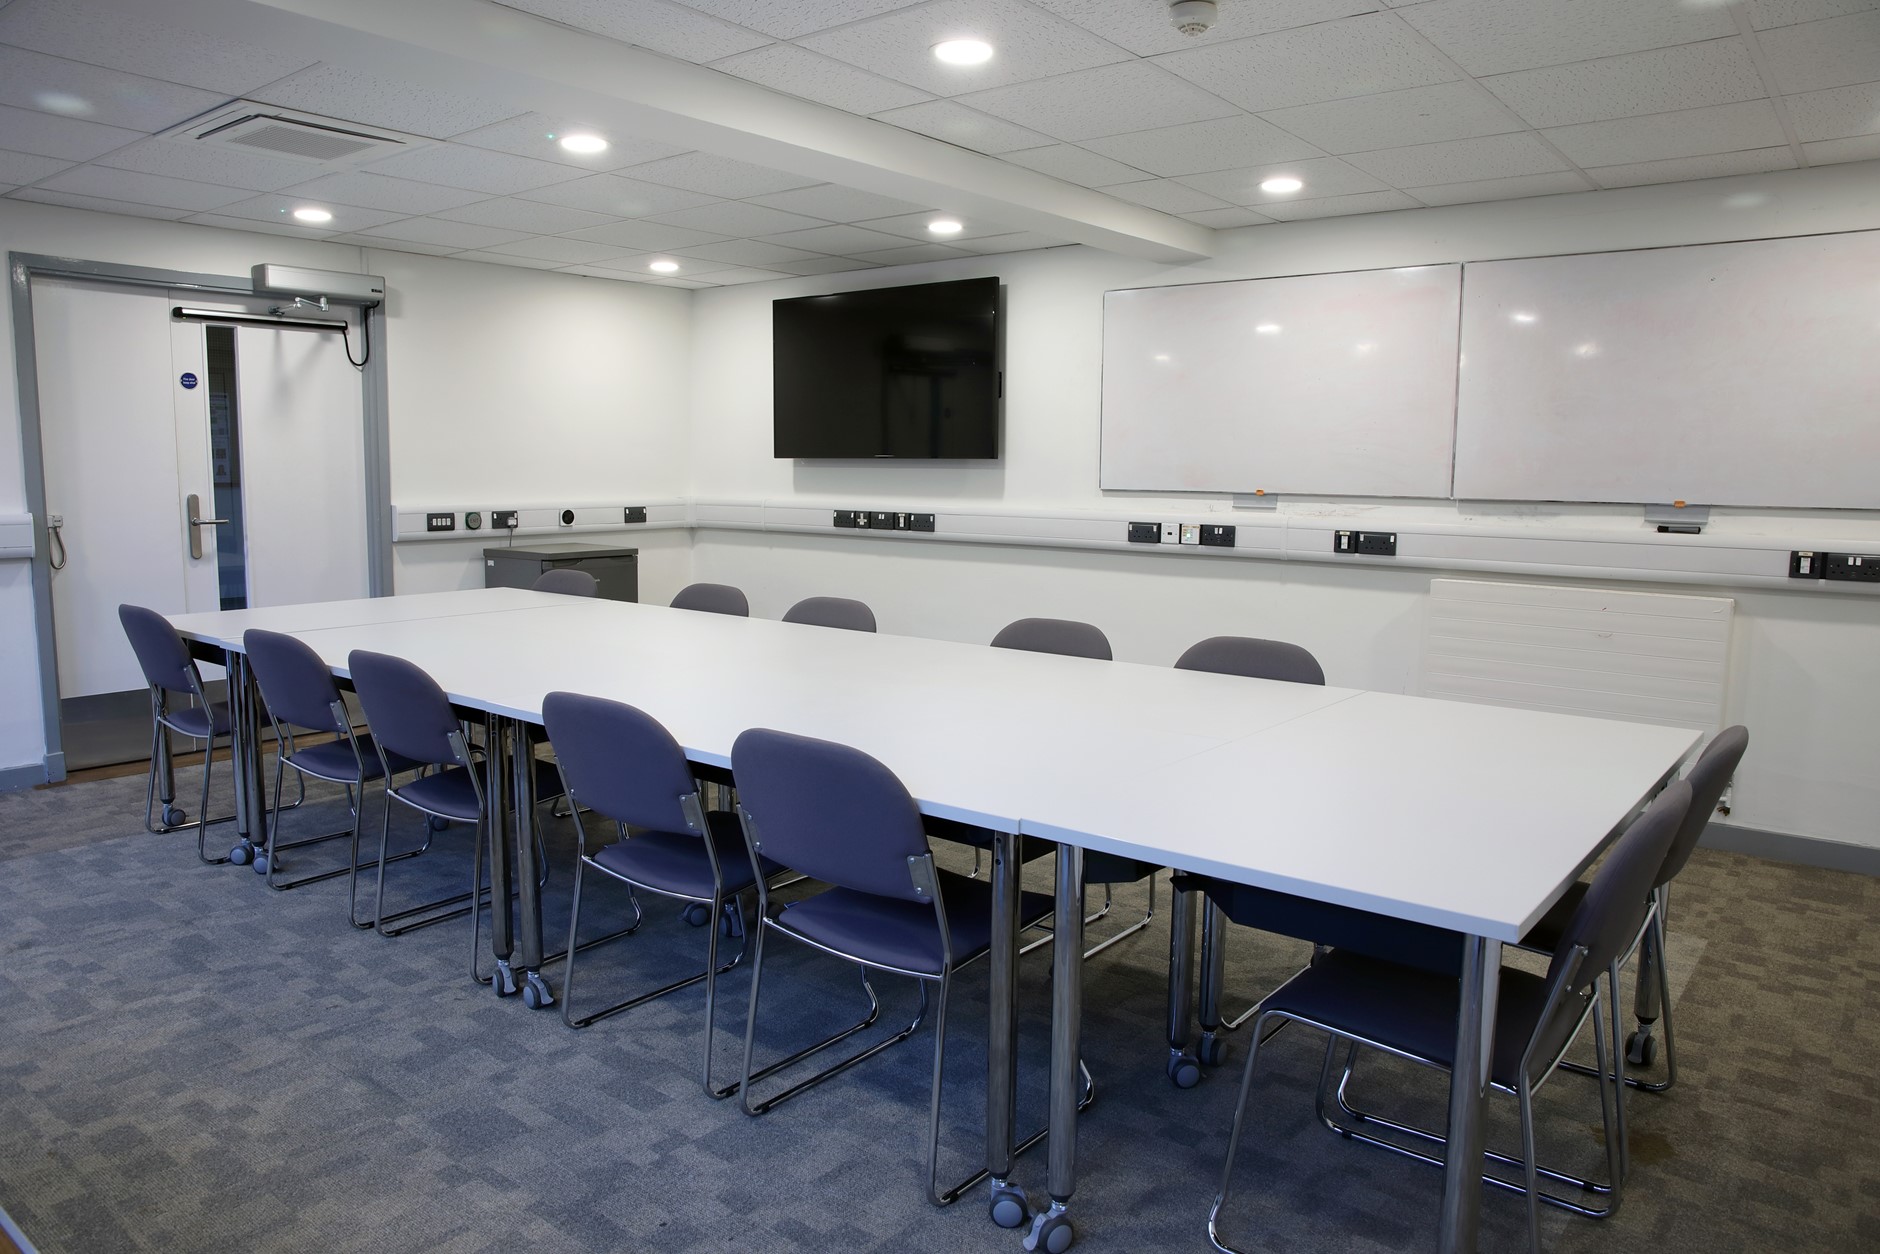 Spooner Room 2 - a boardroom meeting room with white boards and TV screen